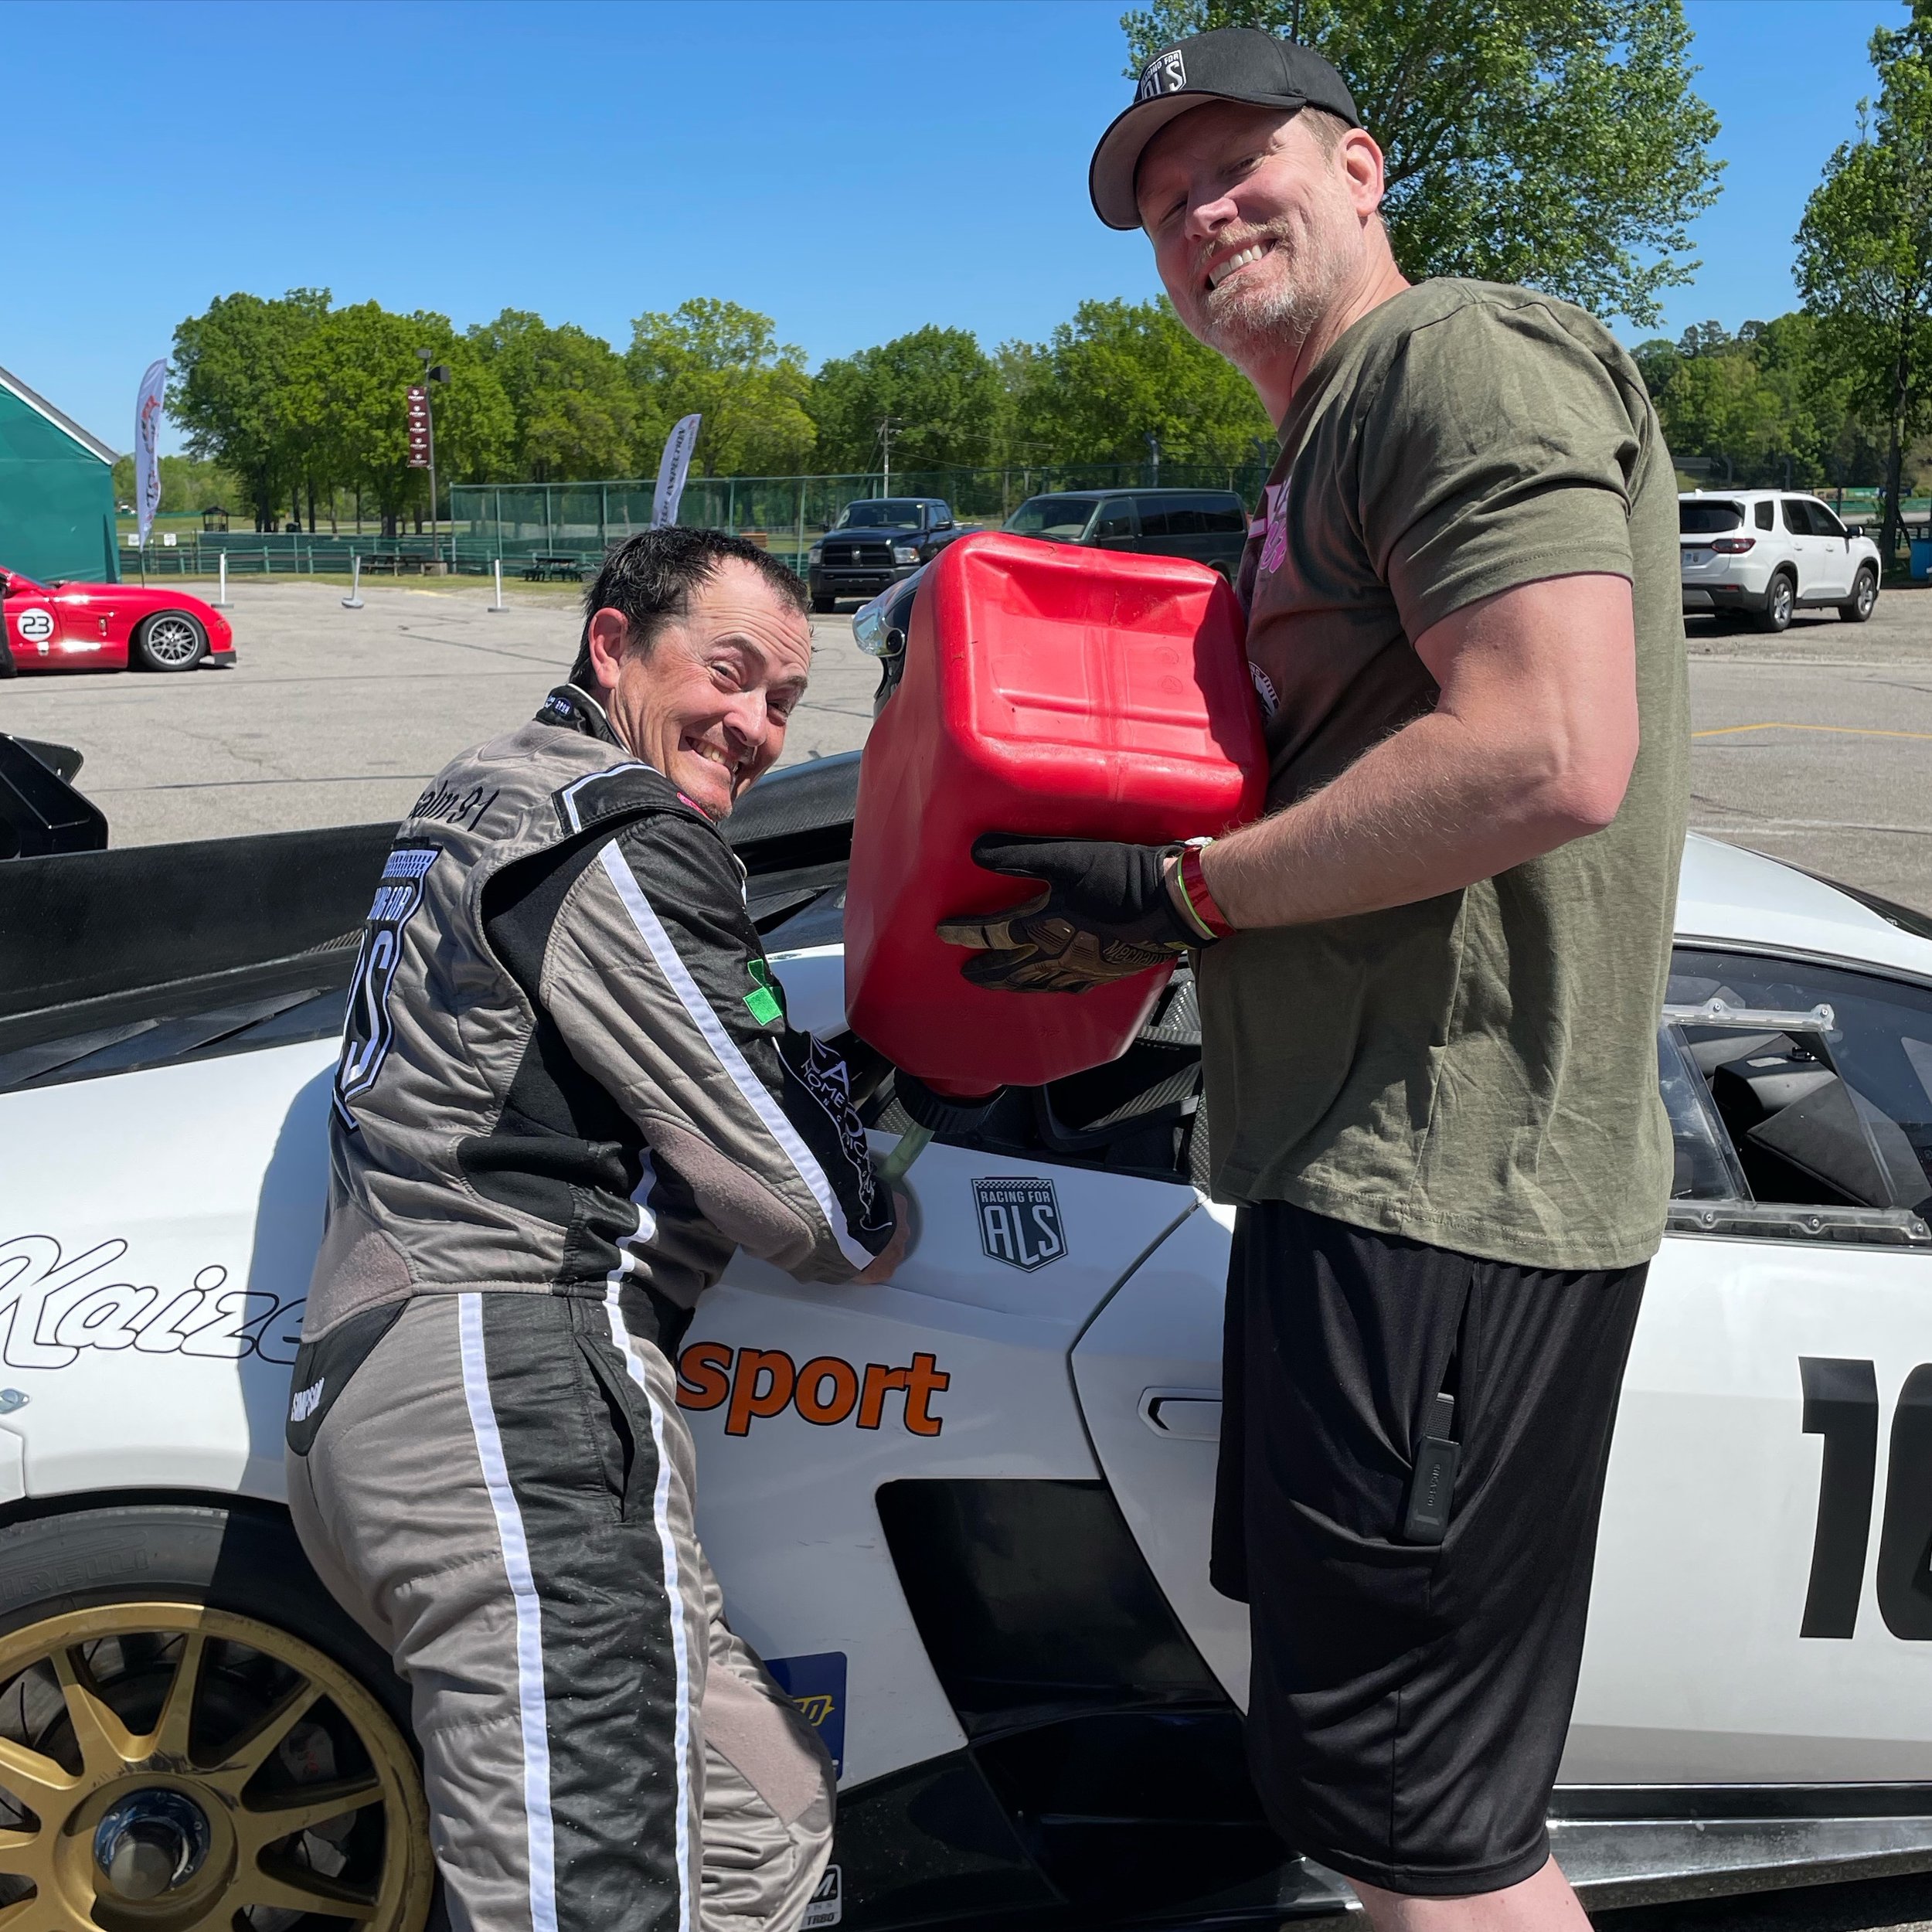 Oh no&hellip;This is perfectly safe! 😂  Jason and Scott are always into something!! 
&hellip;
Pic from Shelly&rsquo;s Race at @virnow put on by @track_advantage and @jax.racing_j.barakat 
&hellip;
#pitroad #shenanigans #friends #racing #racelife #la